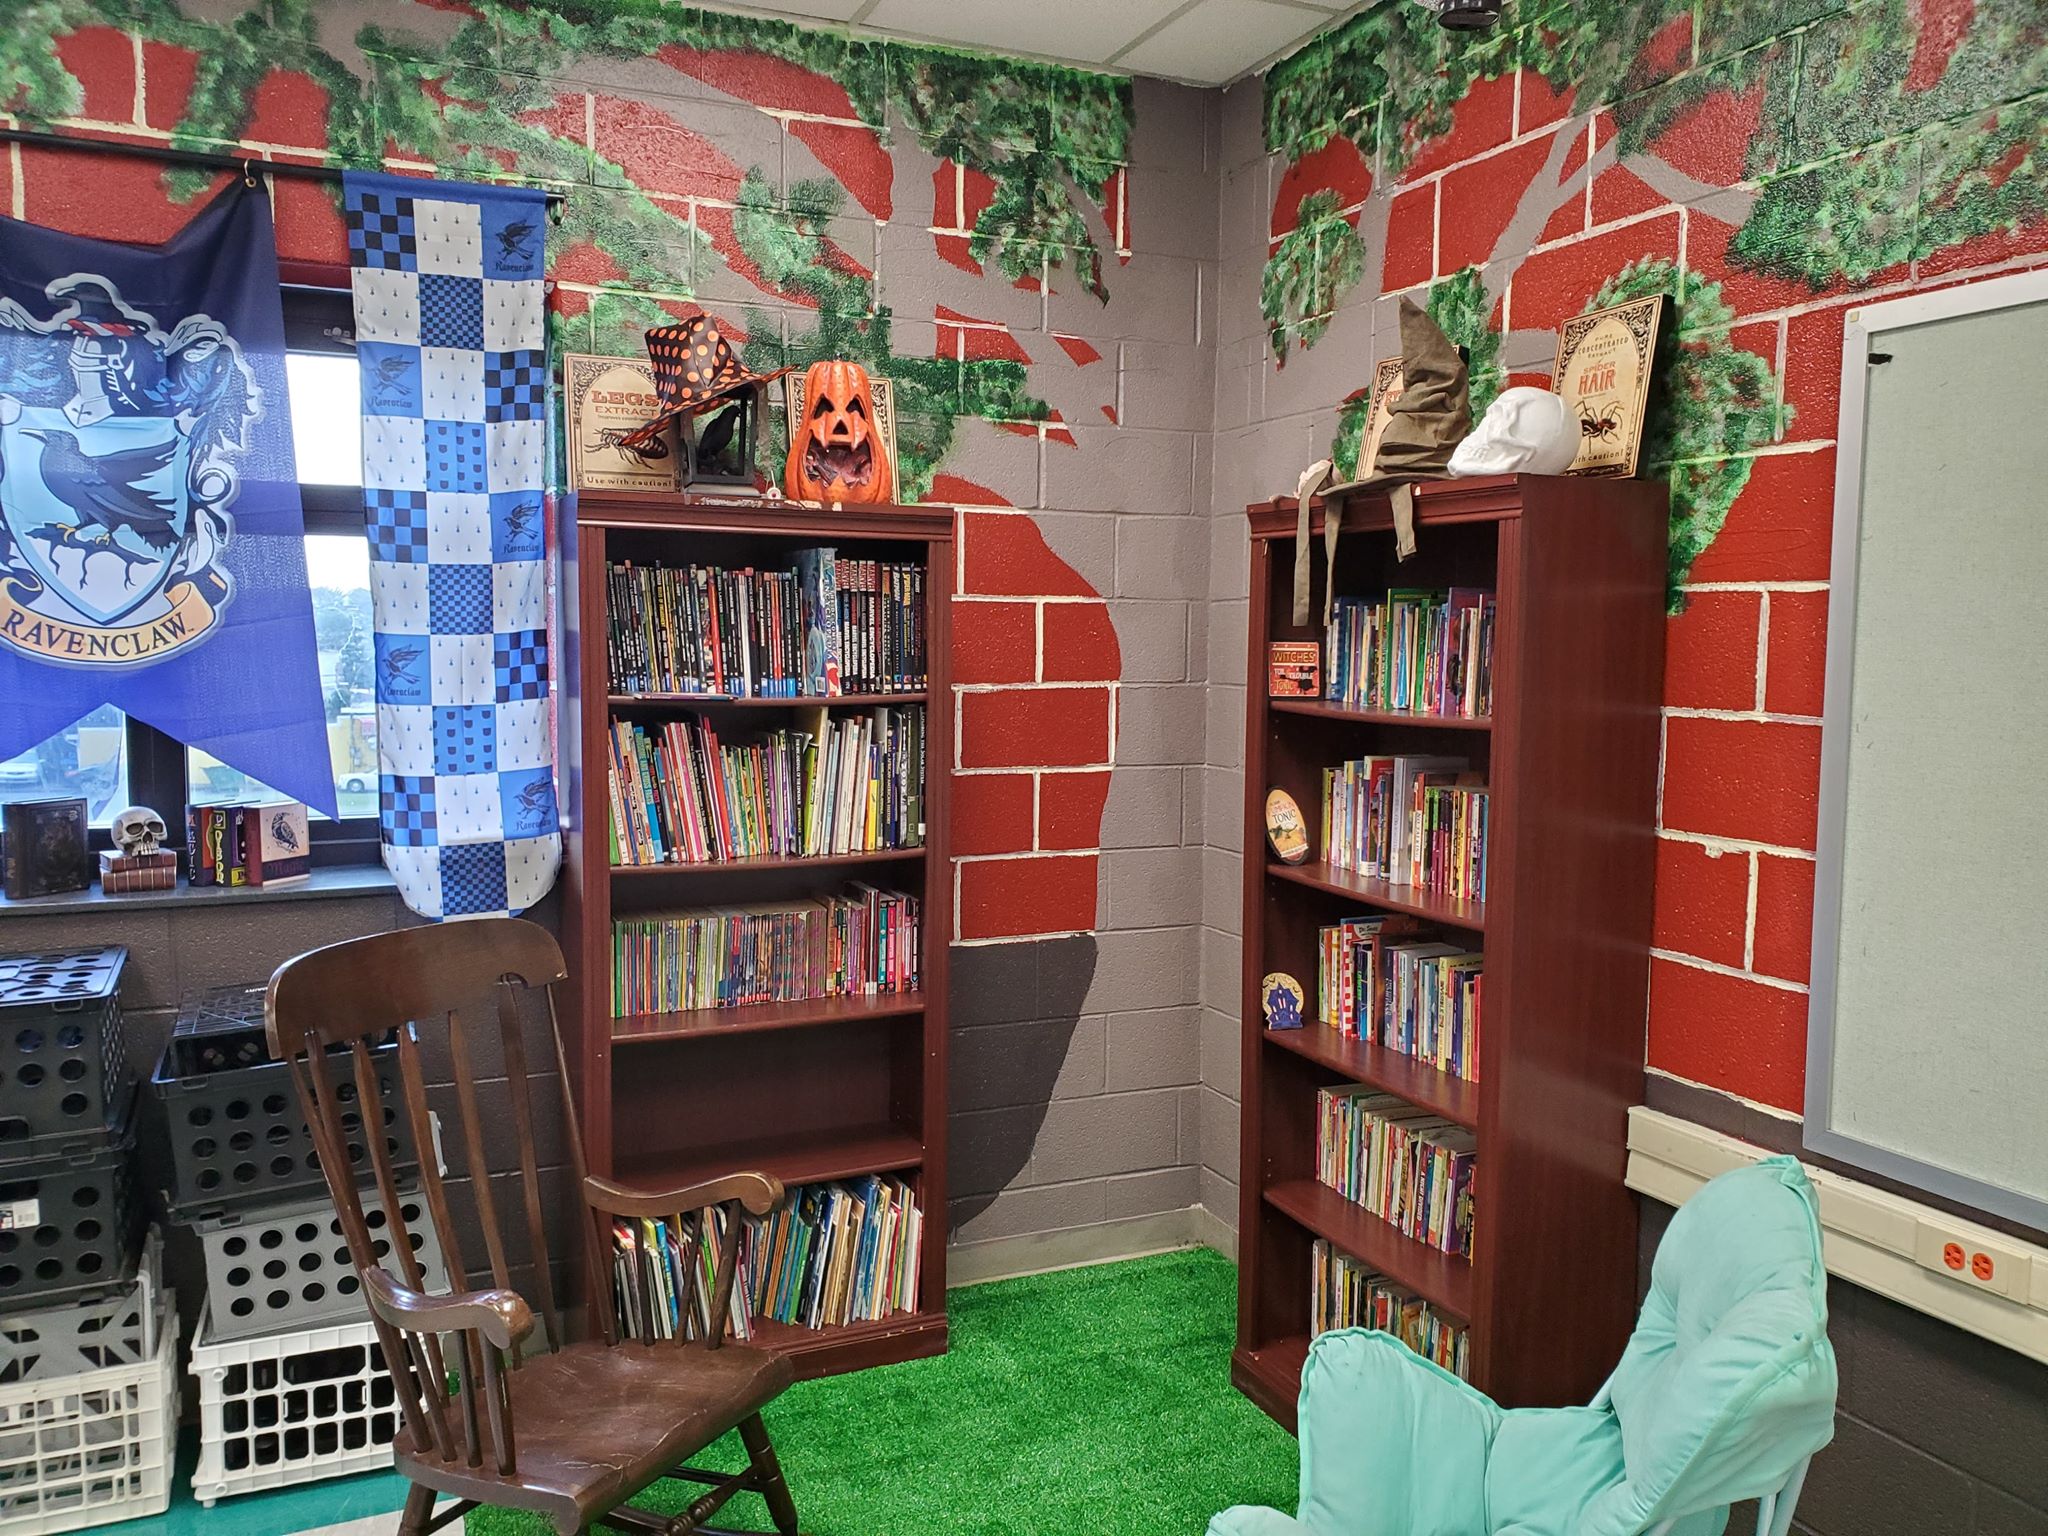 Corner of the 4th grade classroom with a painting of the Whomping Willow on the wall, books, and chairs.